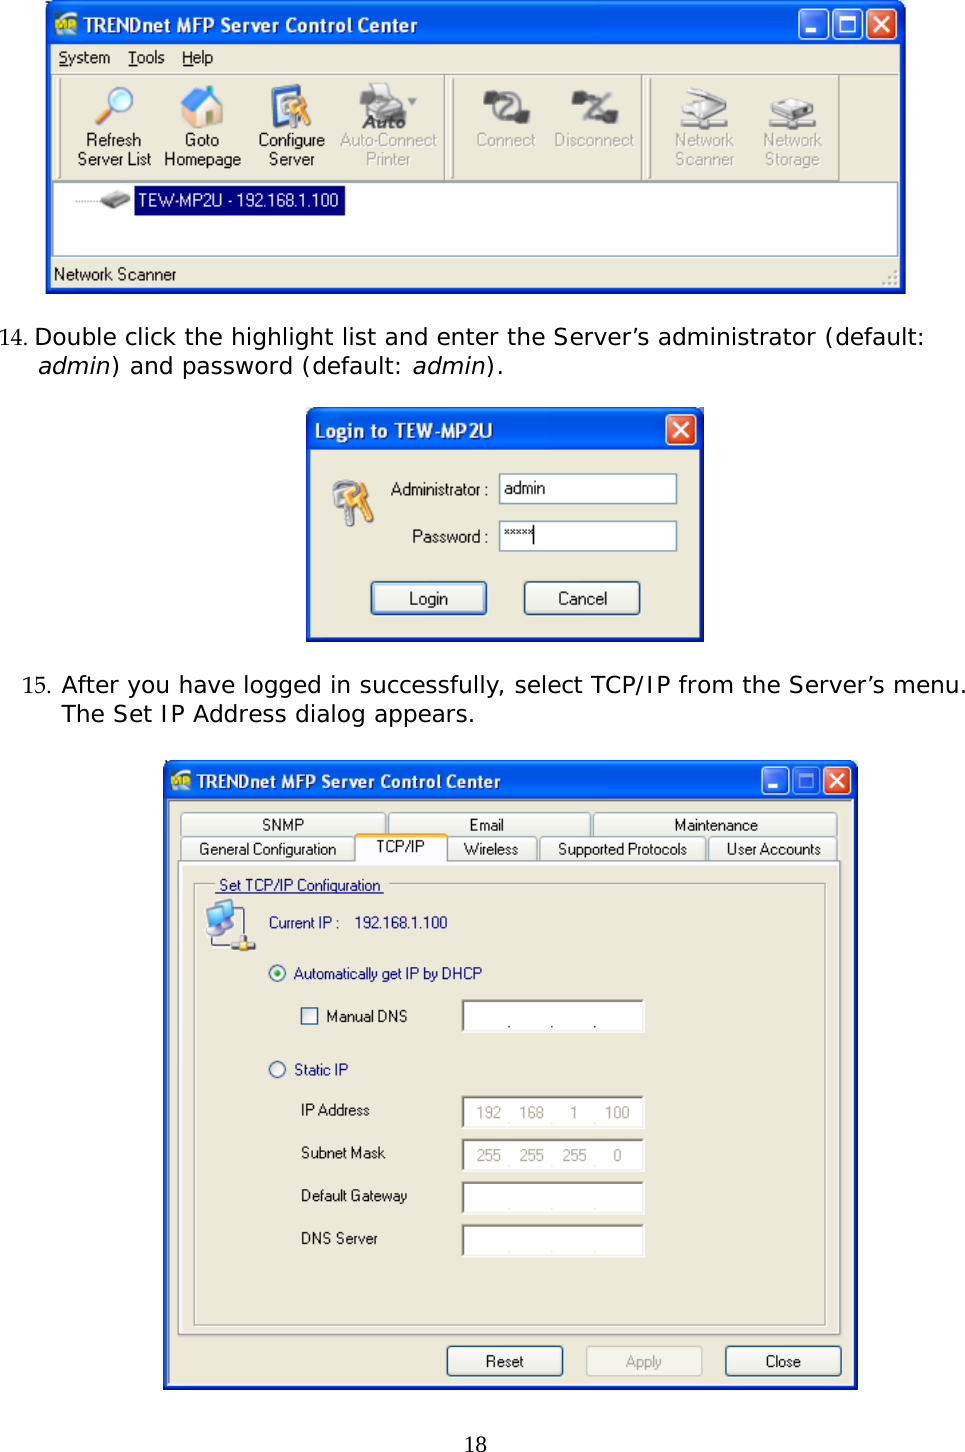     18  14. Double click the highlight list and enter the Server’s administrator (default: admin) and password (default: admin).     15. After you have logged in successfully, select TCP/IP from the Server’s menu. The Set IP Address dialog appears.     